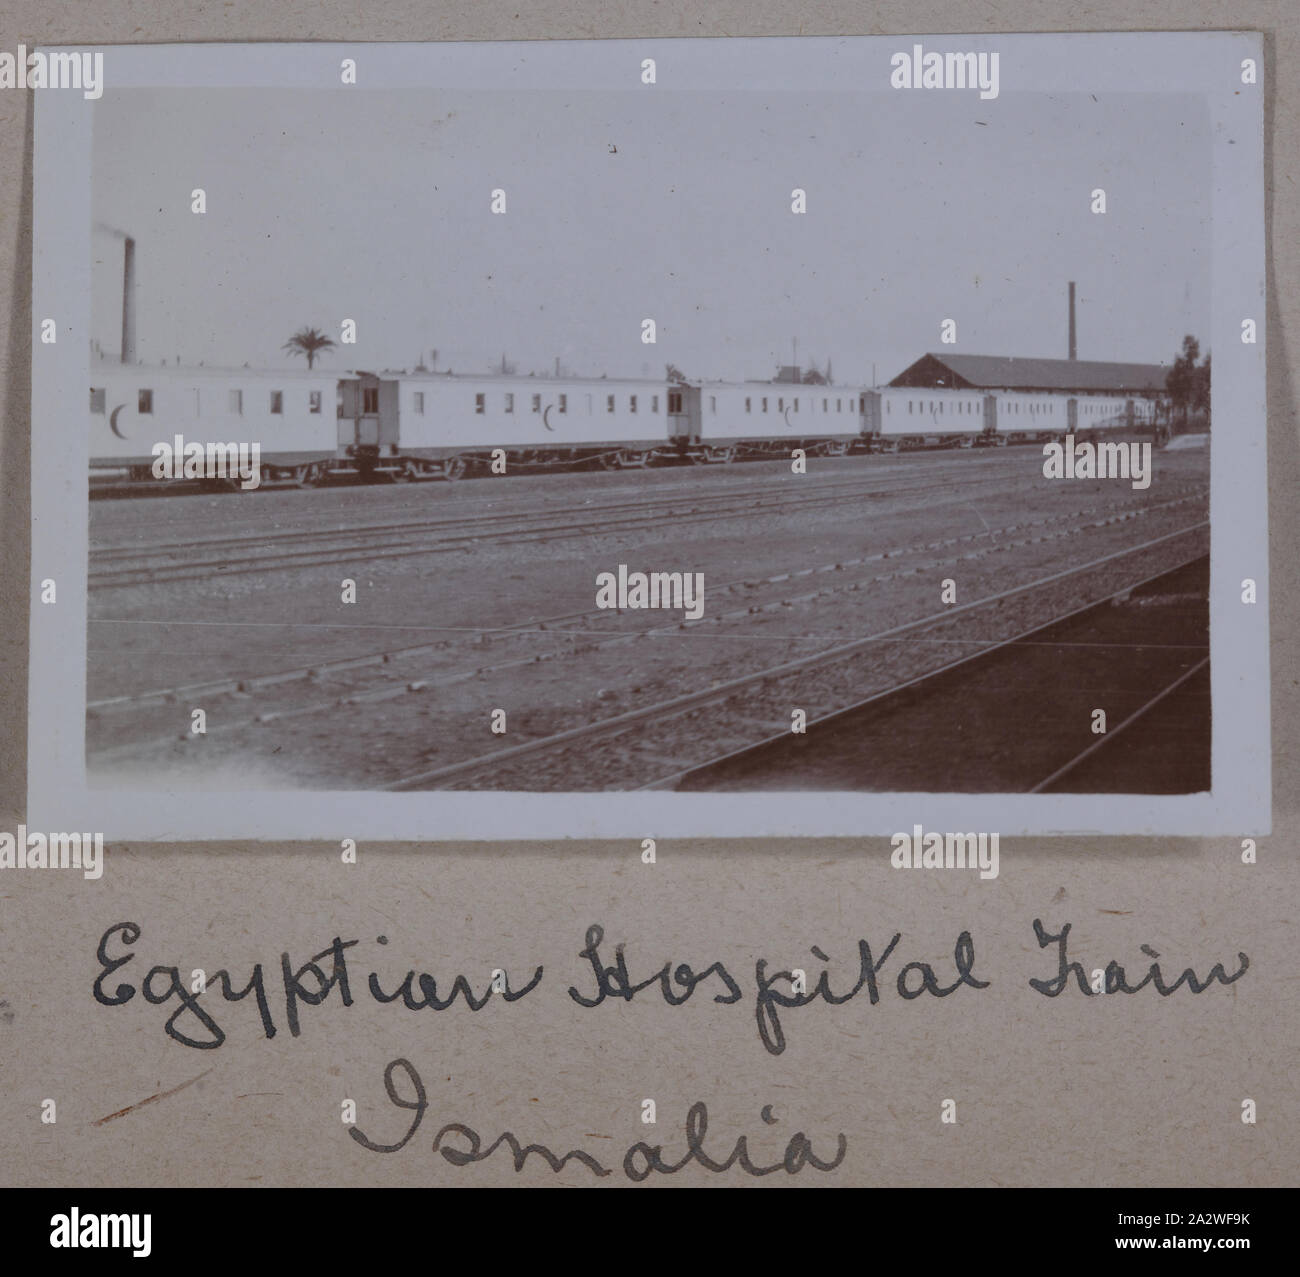 Photograph - 'Egyptian Hospital Train', Egypt, Captain Edward Albert McKenna, World War I, 1914-1915, One of 139 photographs in an album from World War I likely to have been taken by Captain Edward Albert McKenna. The photographs include the 7th Battalion training in Mena Camp, Egypt, and sight-seeing. Image depicting the Egyptian hospital train at Ismalia Stock Photo